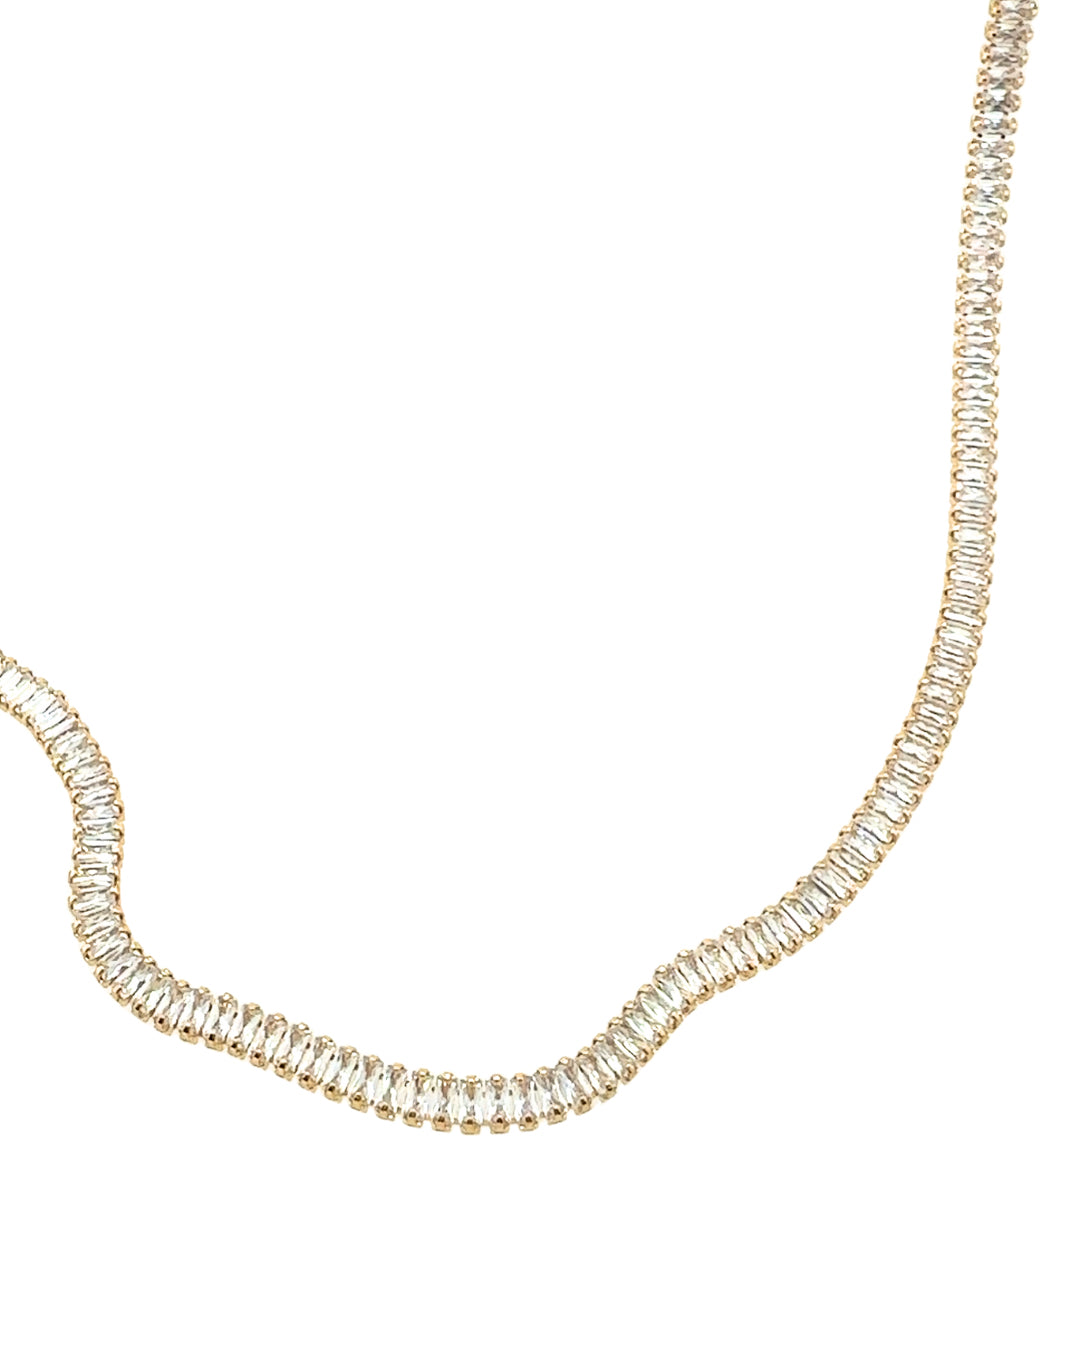 14k yellow gold fill classic crystal baguette tennis white diamond choker necklace